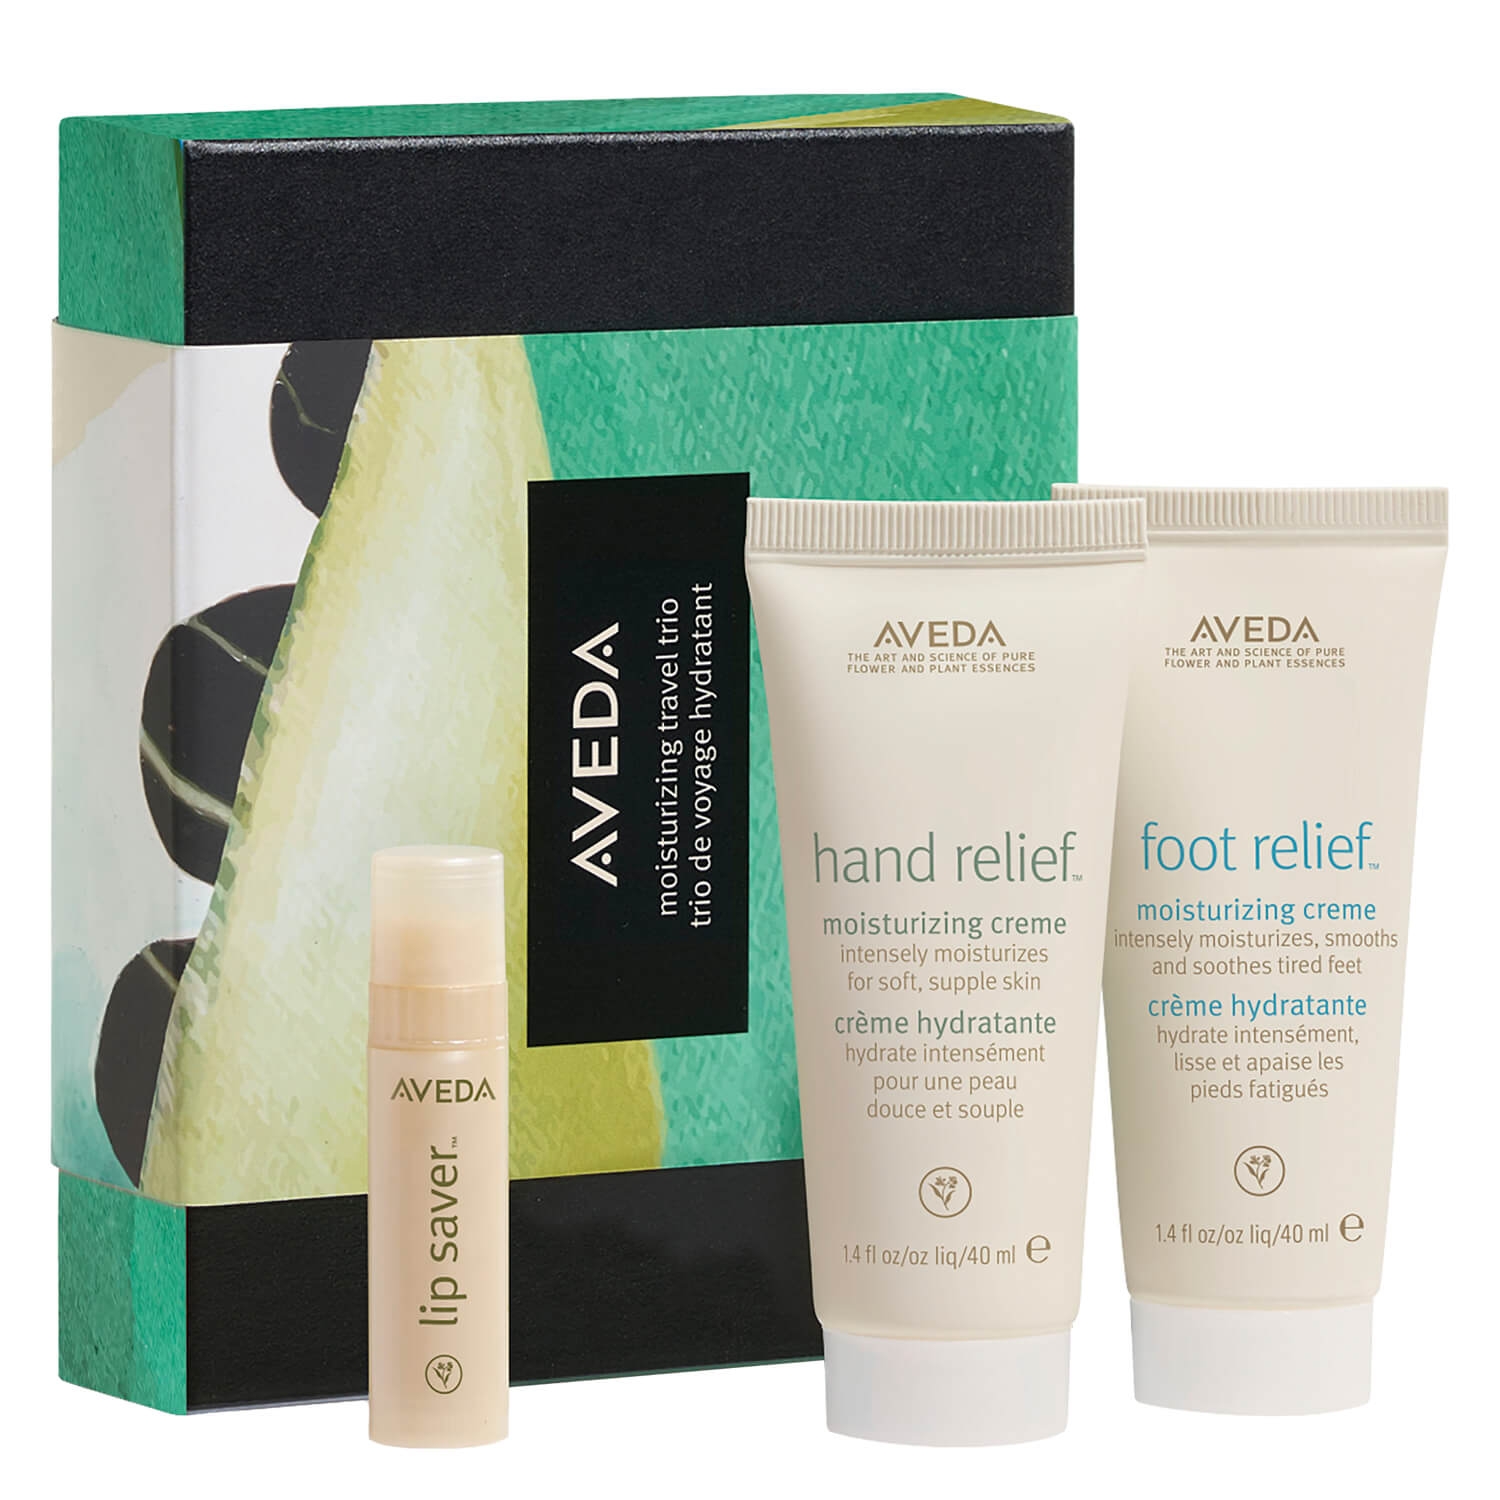 Product image from aveda specials - moisturizing travel trio